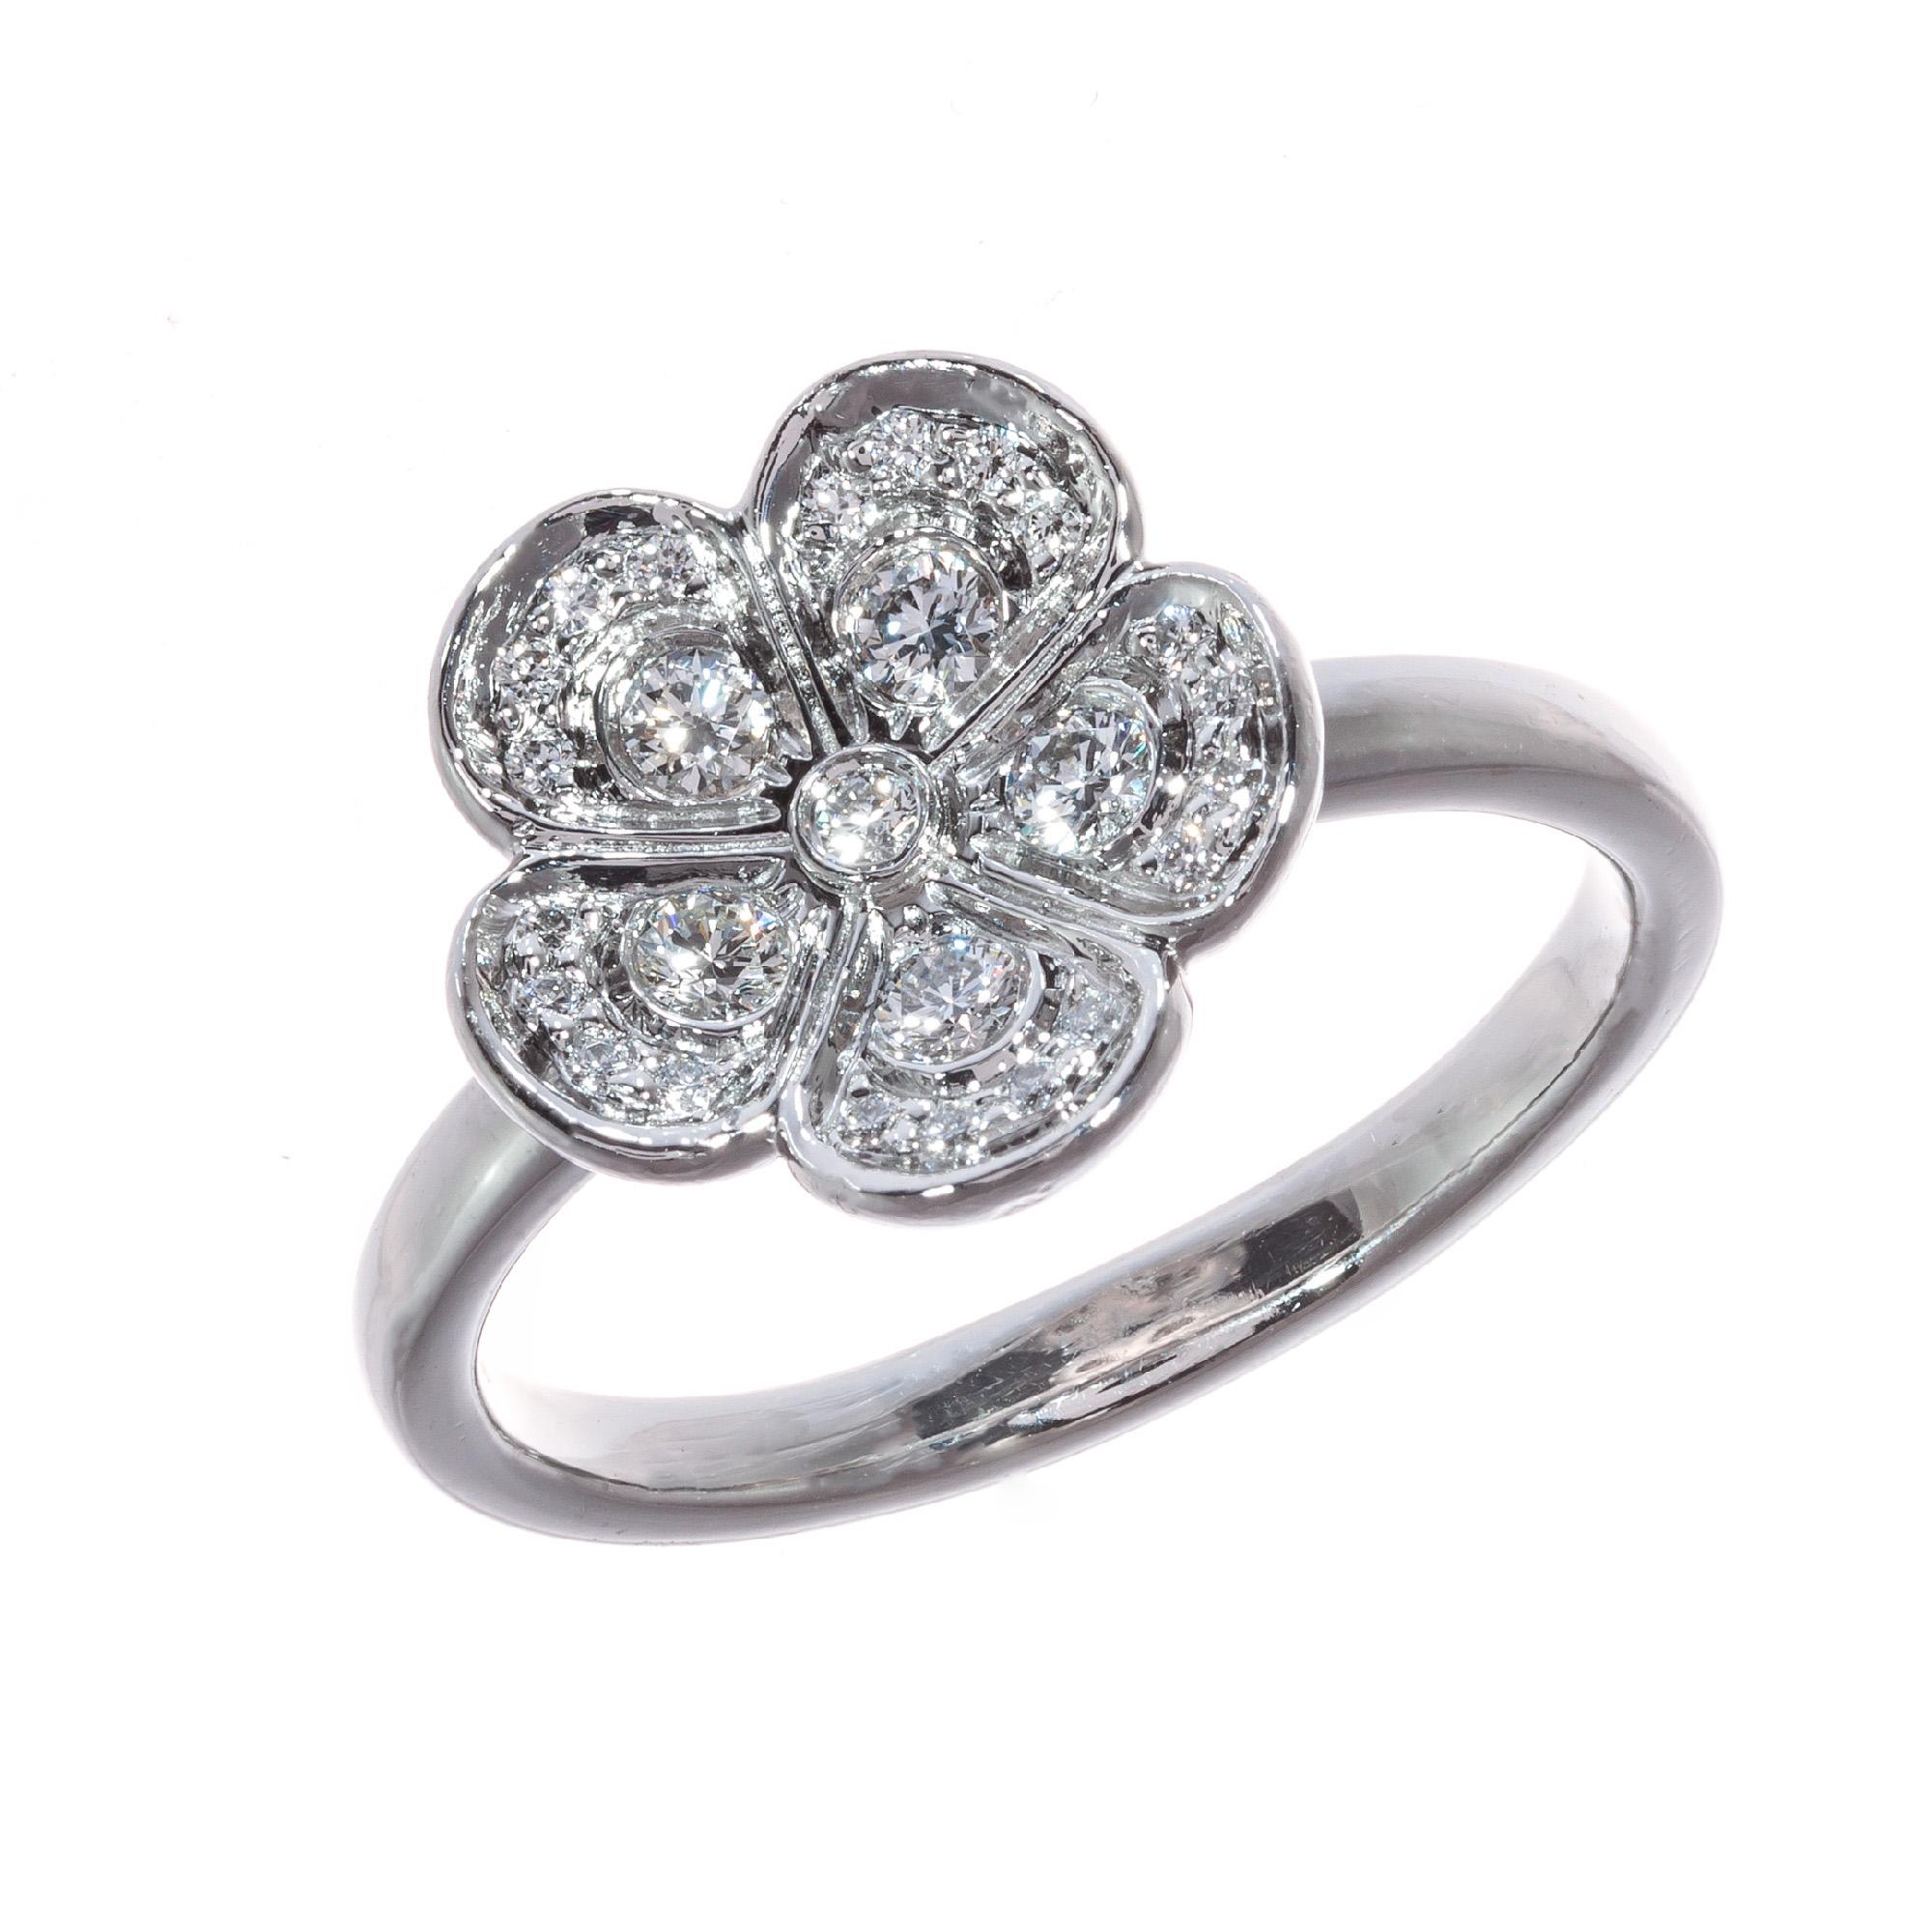 Tiffany & Co Enchanted garden diamond flower platinum ring. 26 round brilliant cut diamonds set in a platinum setting. 

26 round brilliant cut F-G VS diamonds, Approximate .30cts
Size 6 ½ and sizable 
Platinum 
Stamped: PT 950
Hallmark: Tiffany &